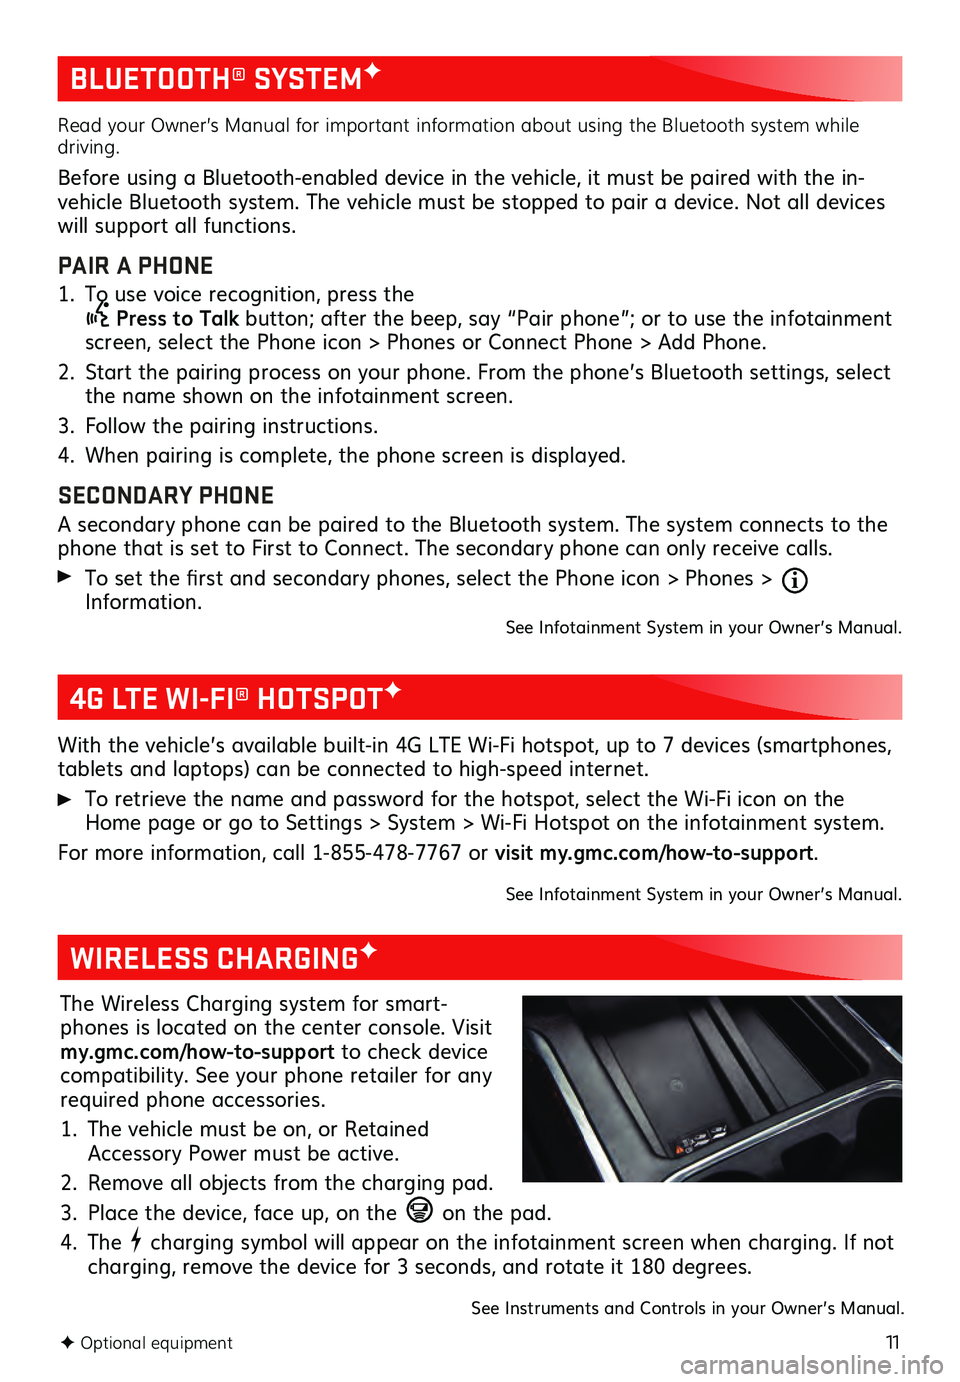 GMC SIERRA 2021  Get To Know Guide 11
BLUETOOTH® SYSTEMF
F Optional equipment     
Read your Owner’s Manual for important information about using the Bluetooth system while 
driving.
Before using a Bluetooth-enabled device in the ve